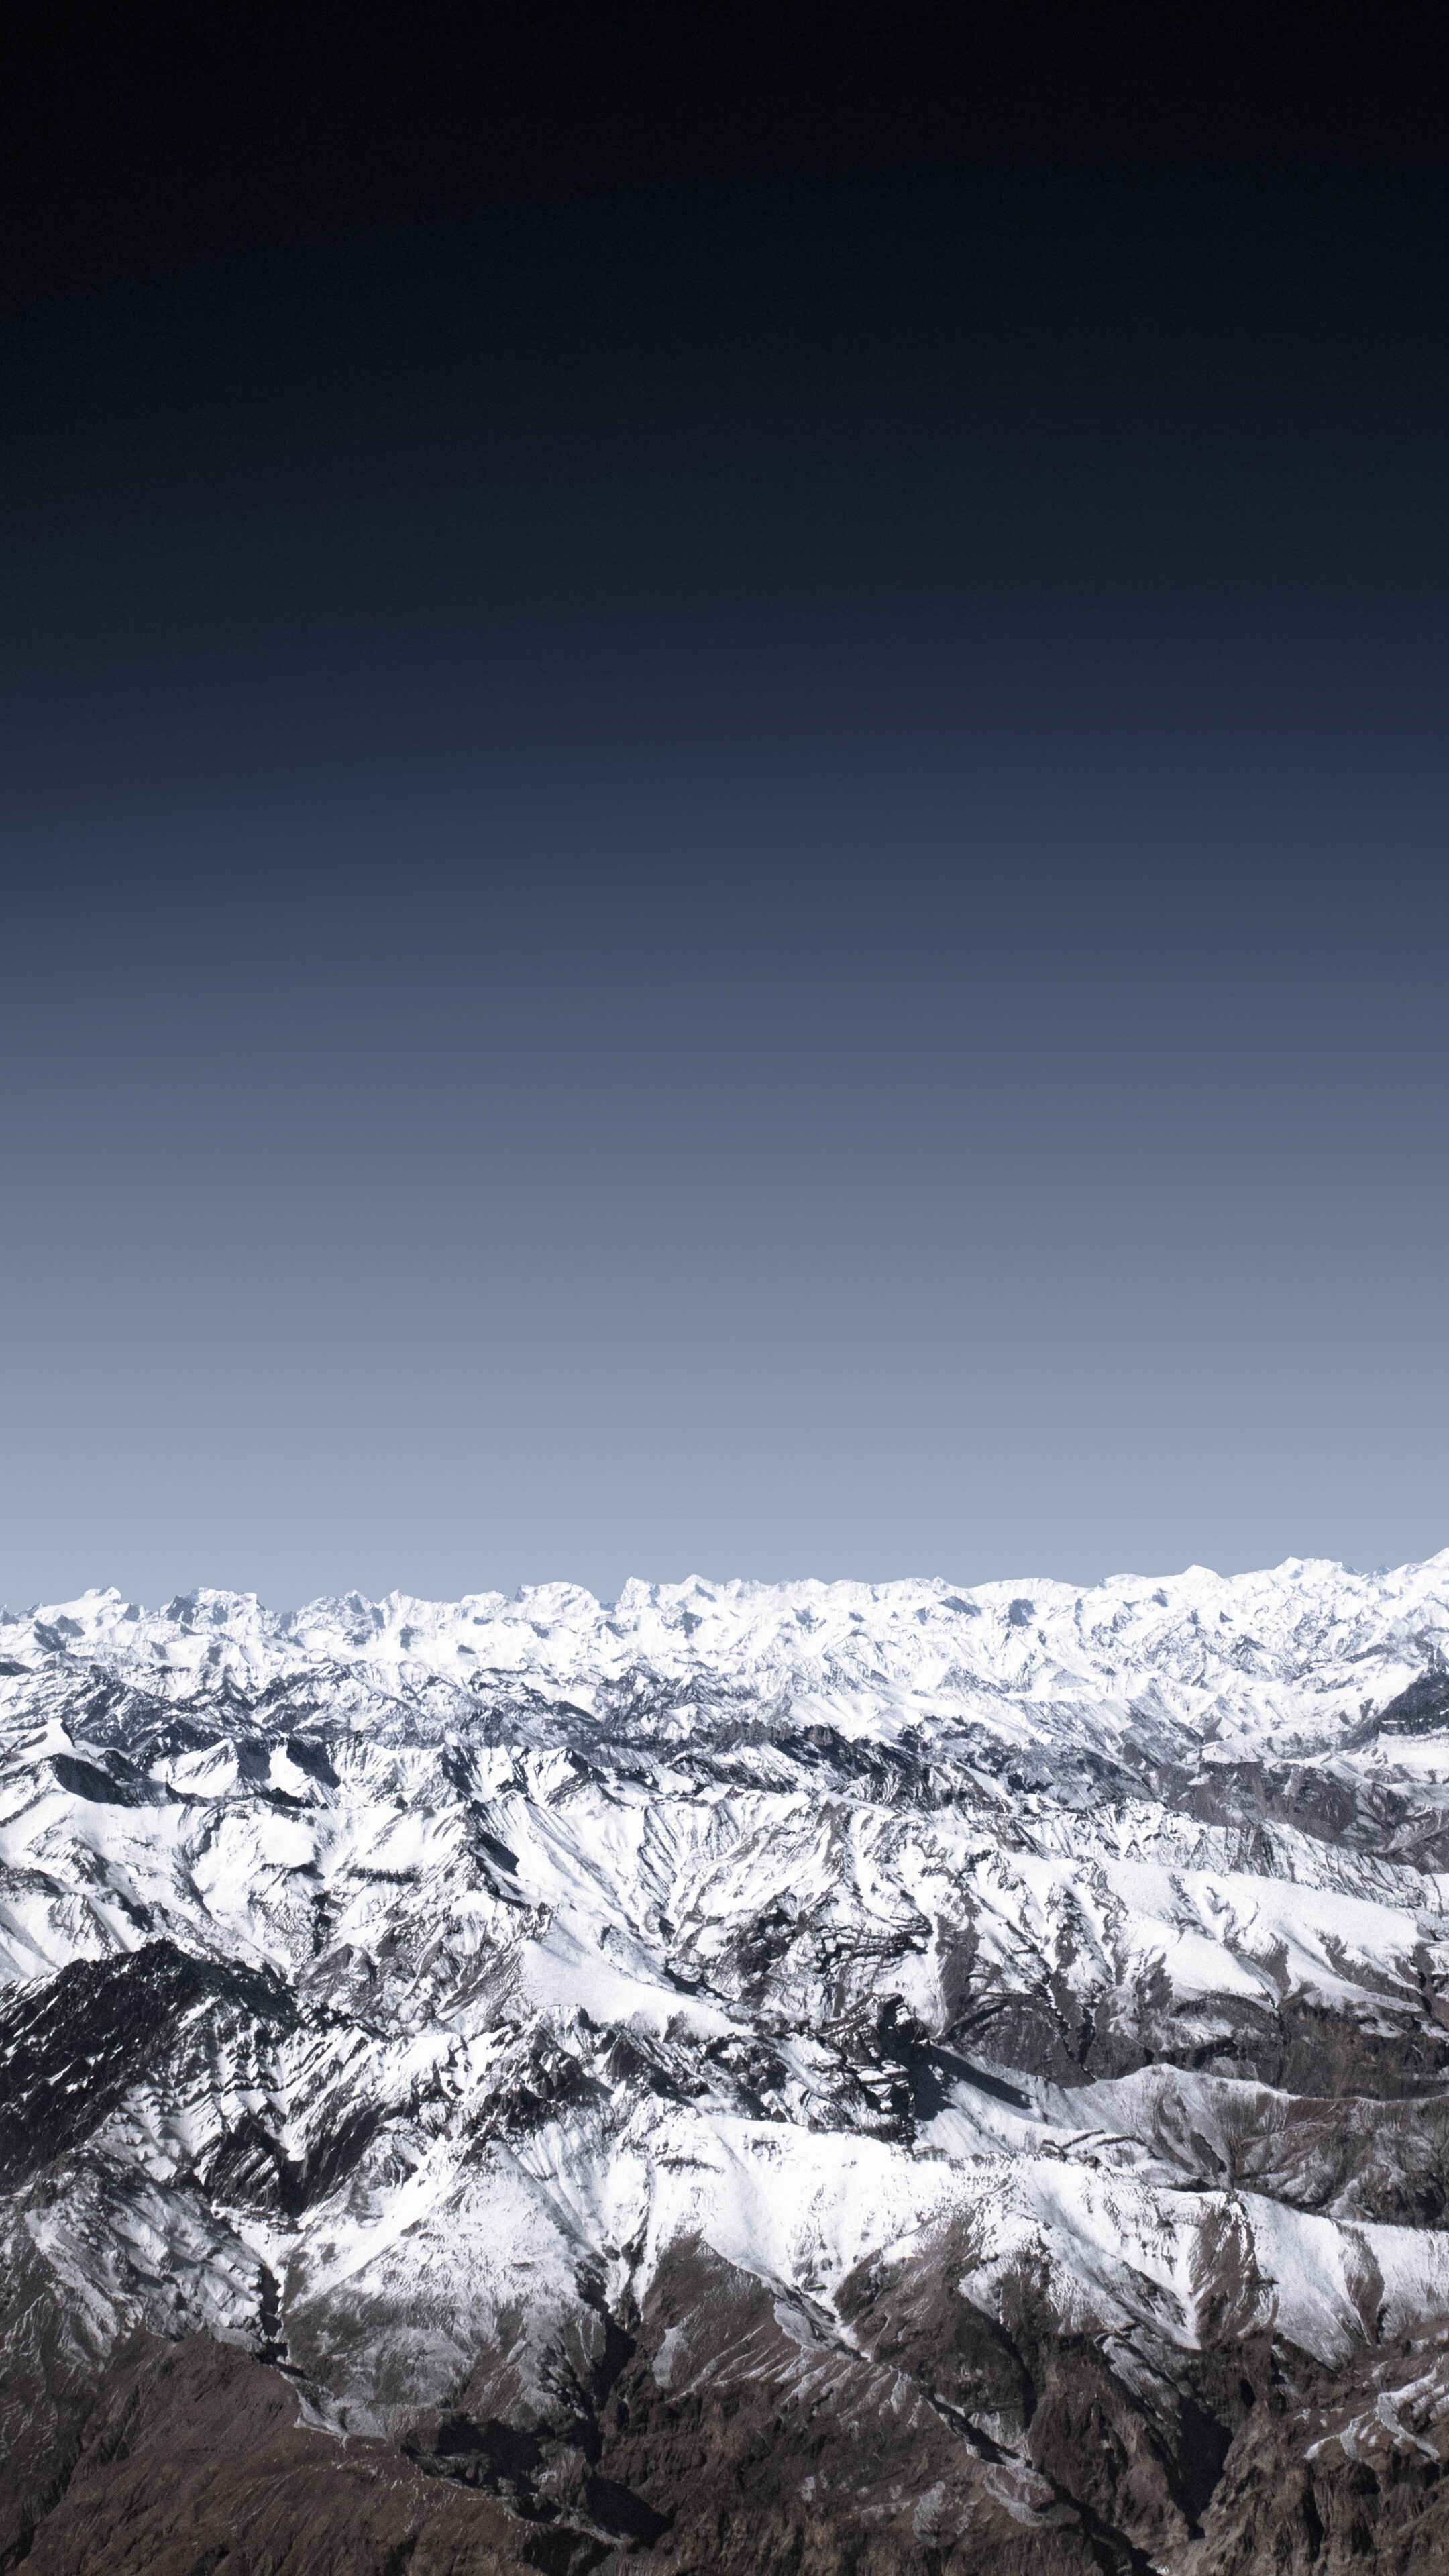 Himalayas: Mountains, Over 100 peaks exceeding 7,200 m (23,600 ft) in elevation lie in the range. 2160x3840 4K Background.